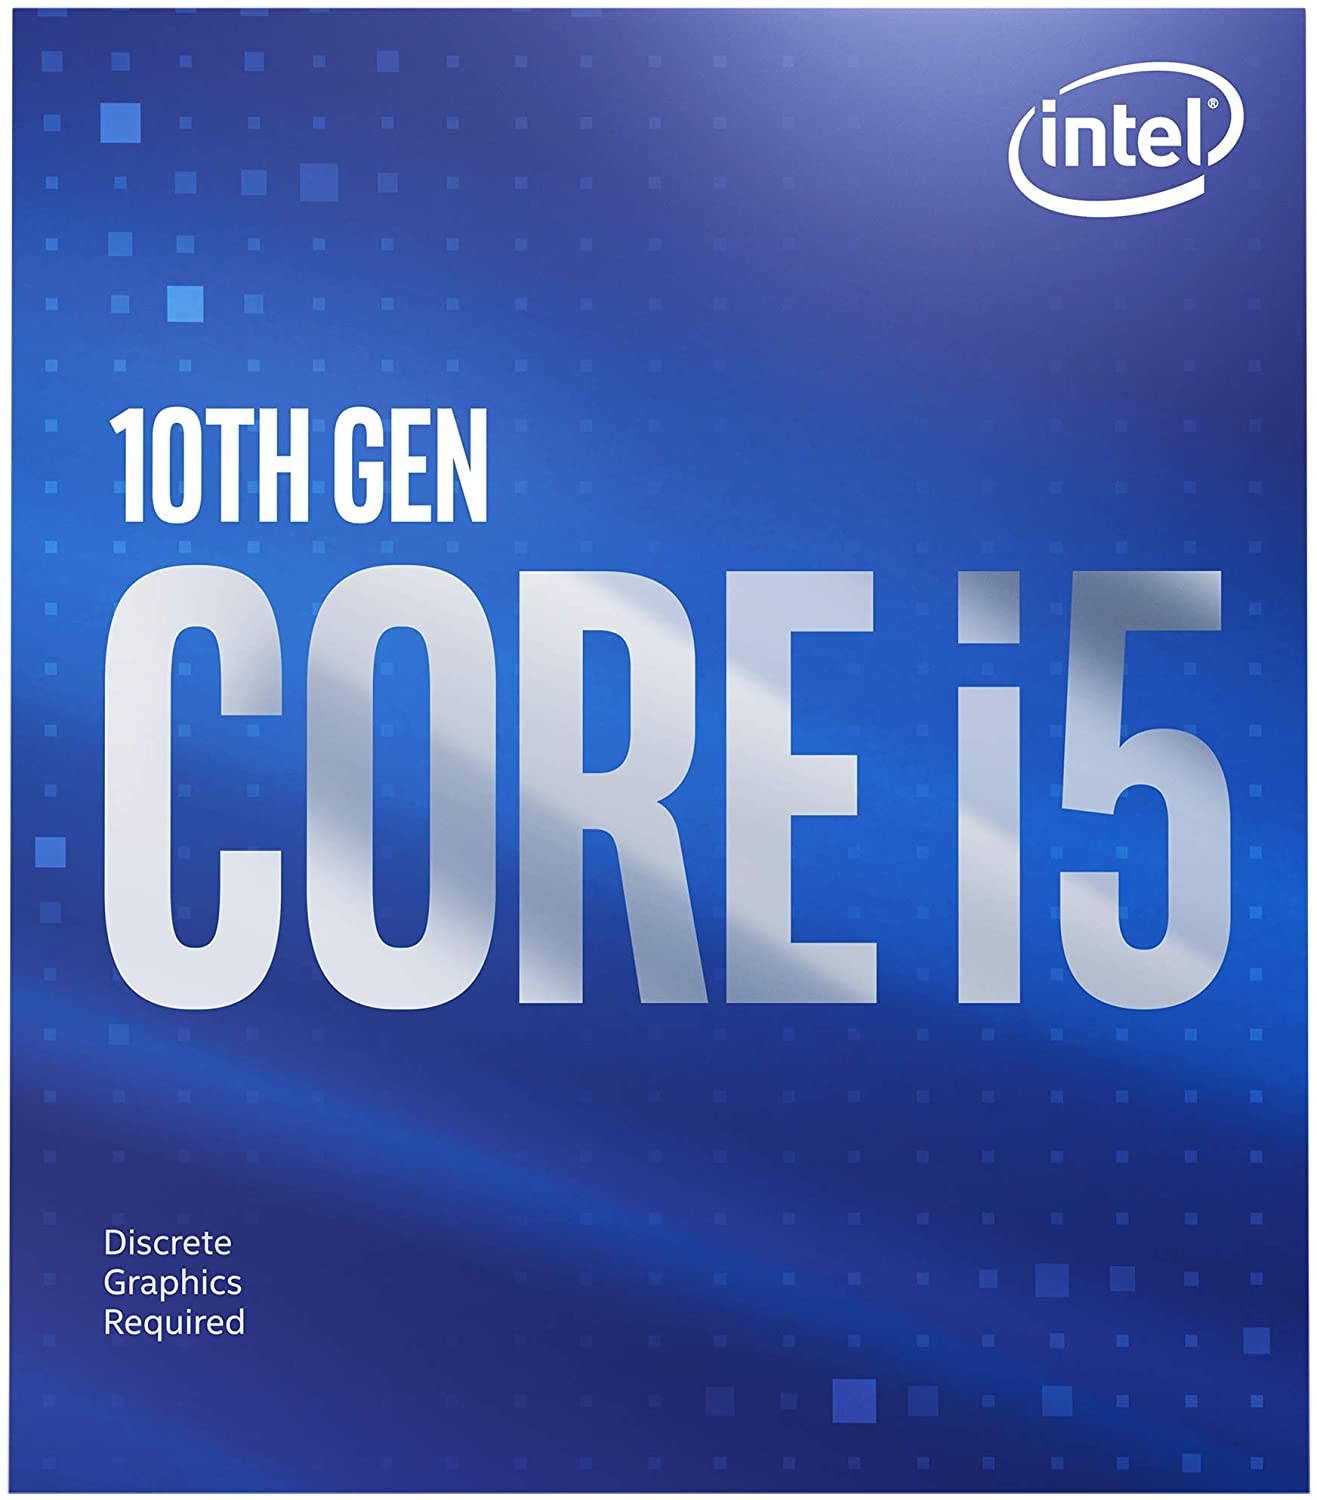 Intel Core i5-10400F Desktop Processor 6 Cores up to 4.3 GHz Without Processor Graphics LGA1200 65W Model Number: BX8070110400F Intel 400 Series chipset 